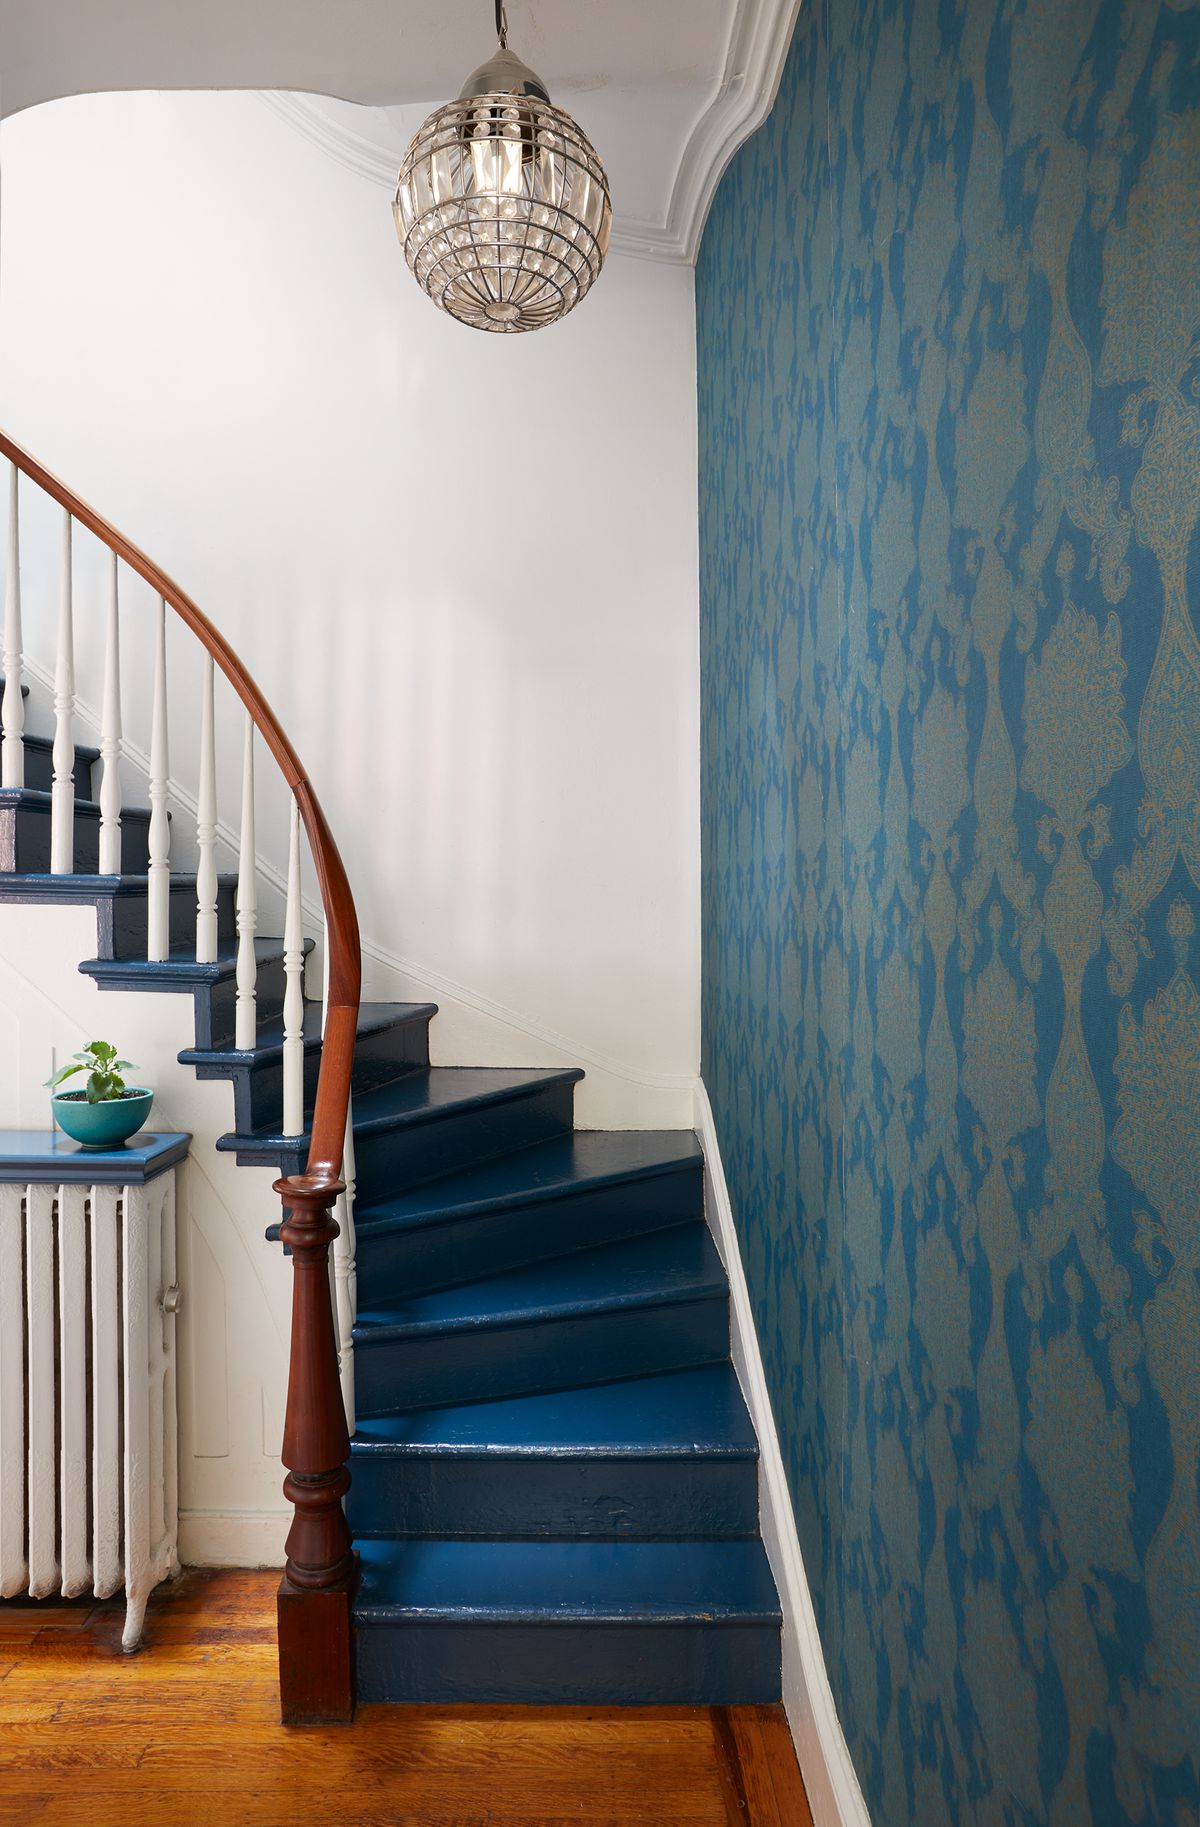 A staircase with blue stairs and a wooden bannister. There is patterned blue wallpaper on one wall. The other wall is painted white. There is a hanging light fixture.